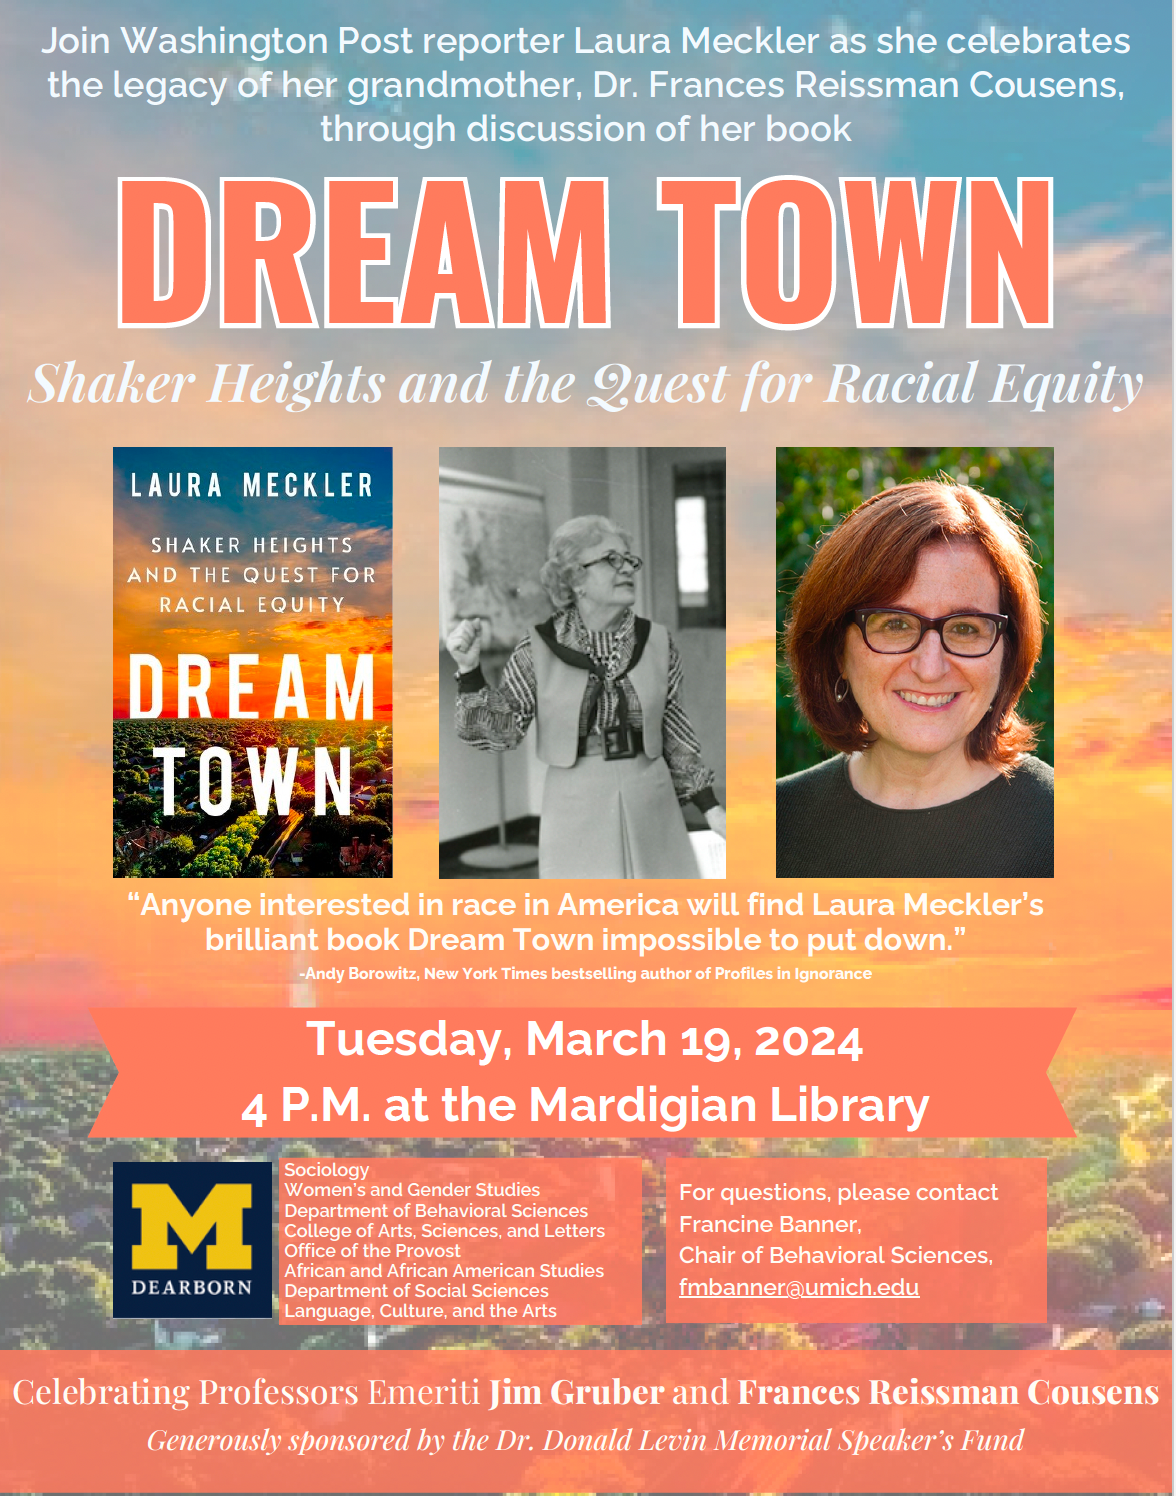 Dream Town Event Flyer; Photo of Laura Meckler and image of her book "Dream Town"